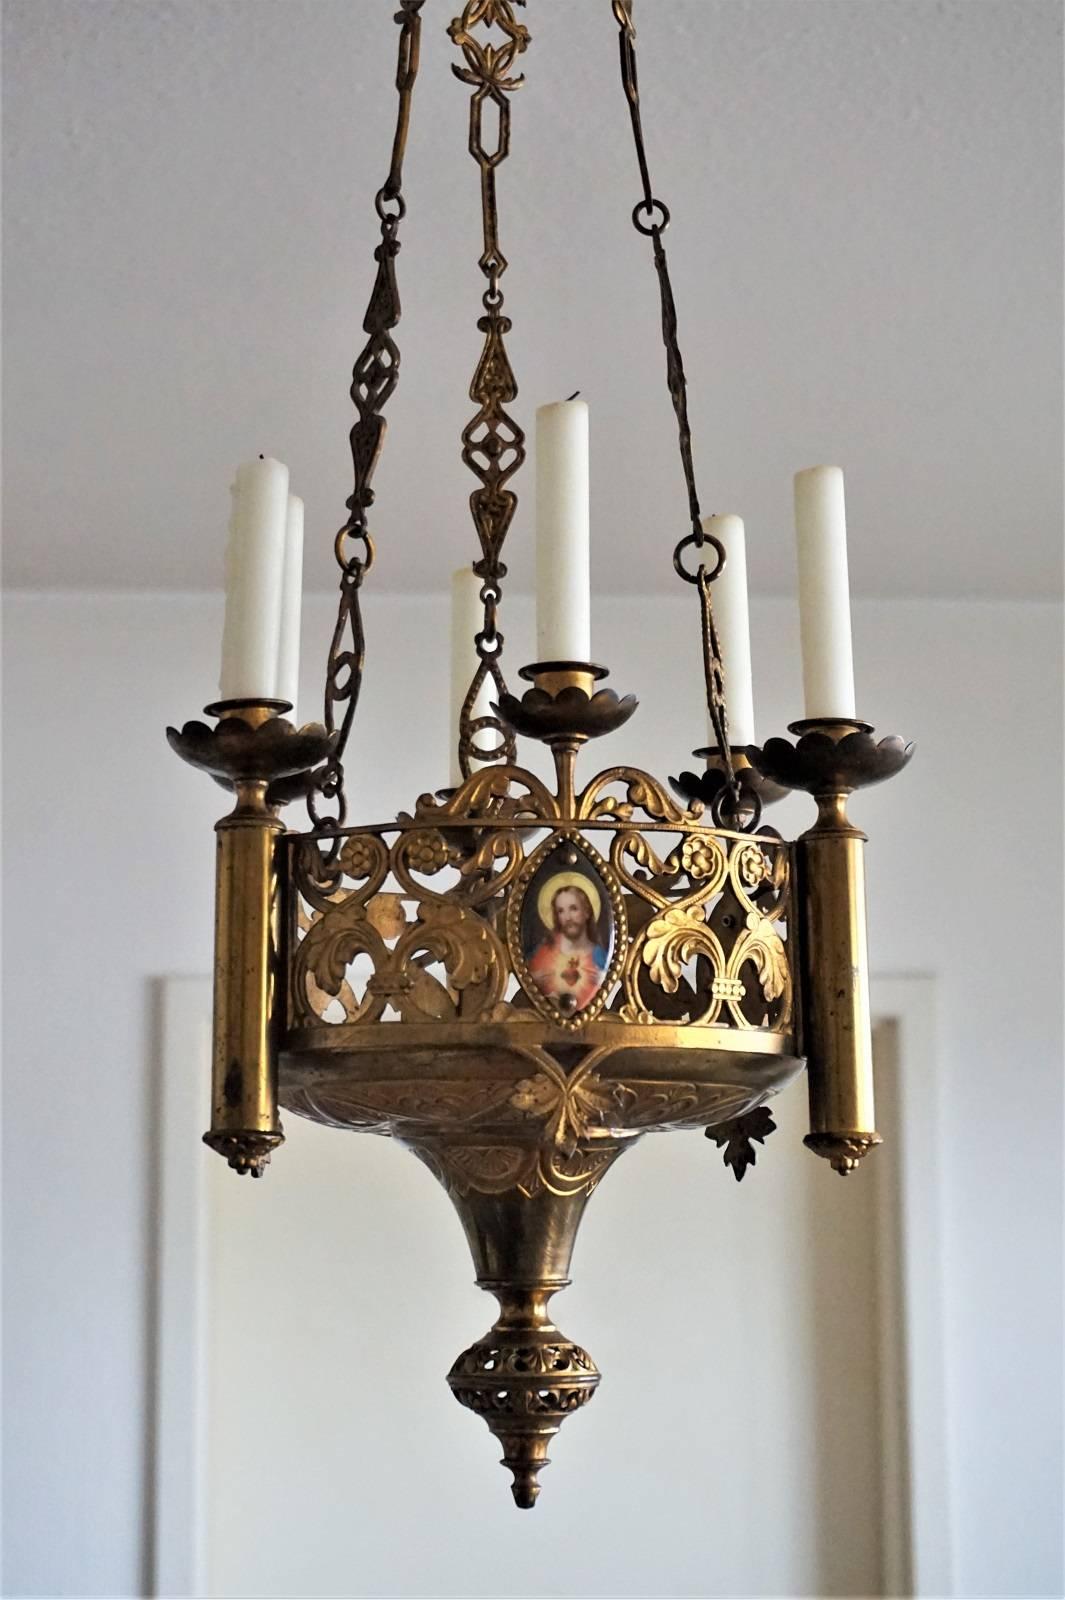 Hand-Painted 18th Century Gothic Revival Gilt Bronze Church Sanctuary Lamp Candle Chandelier